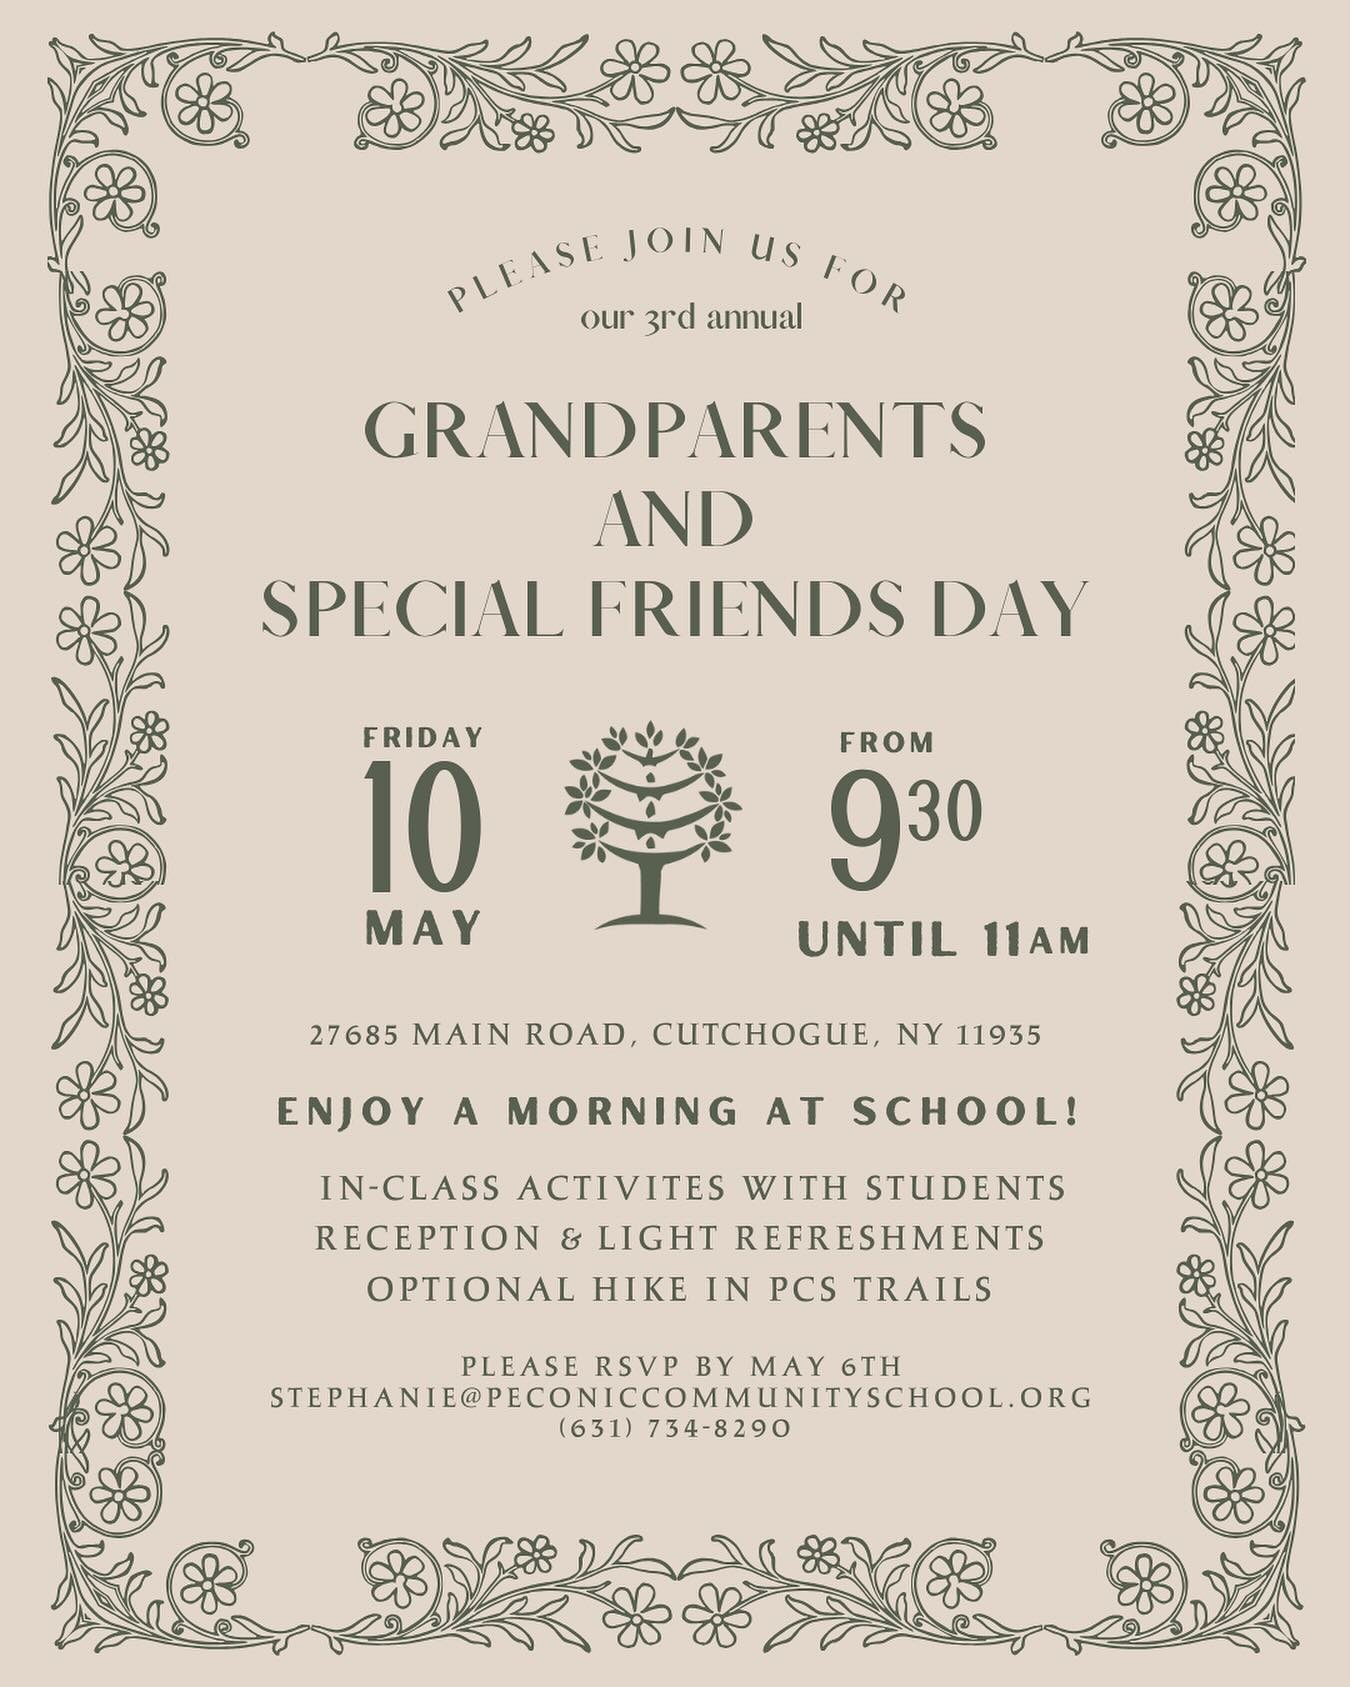 Grandparents and Special Friends Day is this Friday, May 10th! We hope you can join us from 9:30 to 11am for a special morning at school planned just for you &mdash; we have classroom activities with the students, a reception/community gathering with